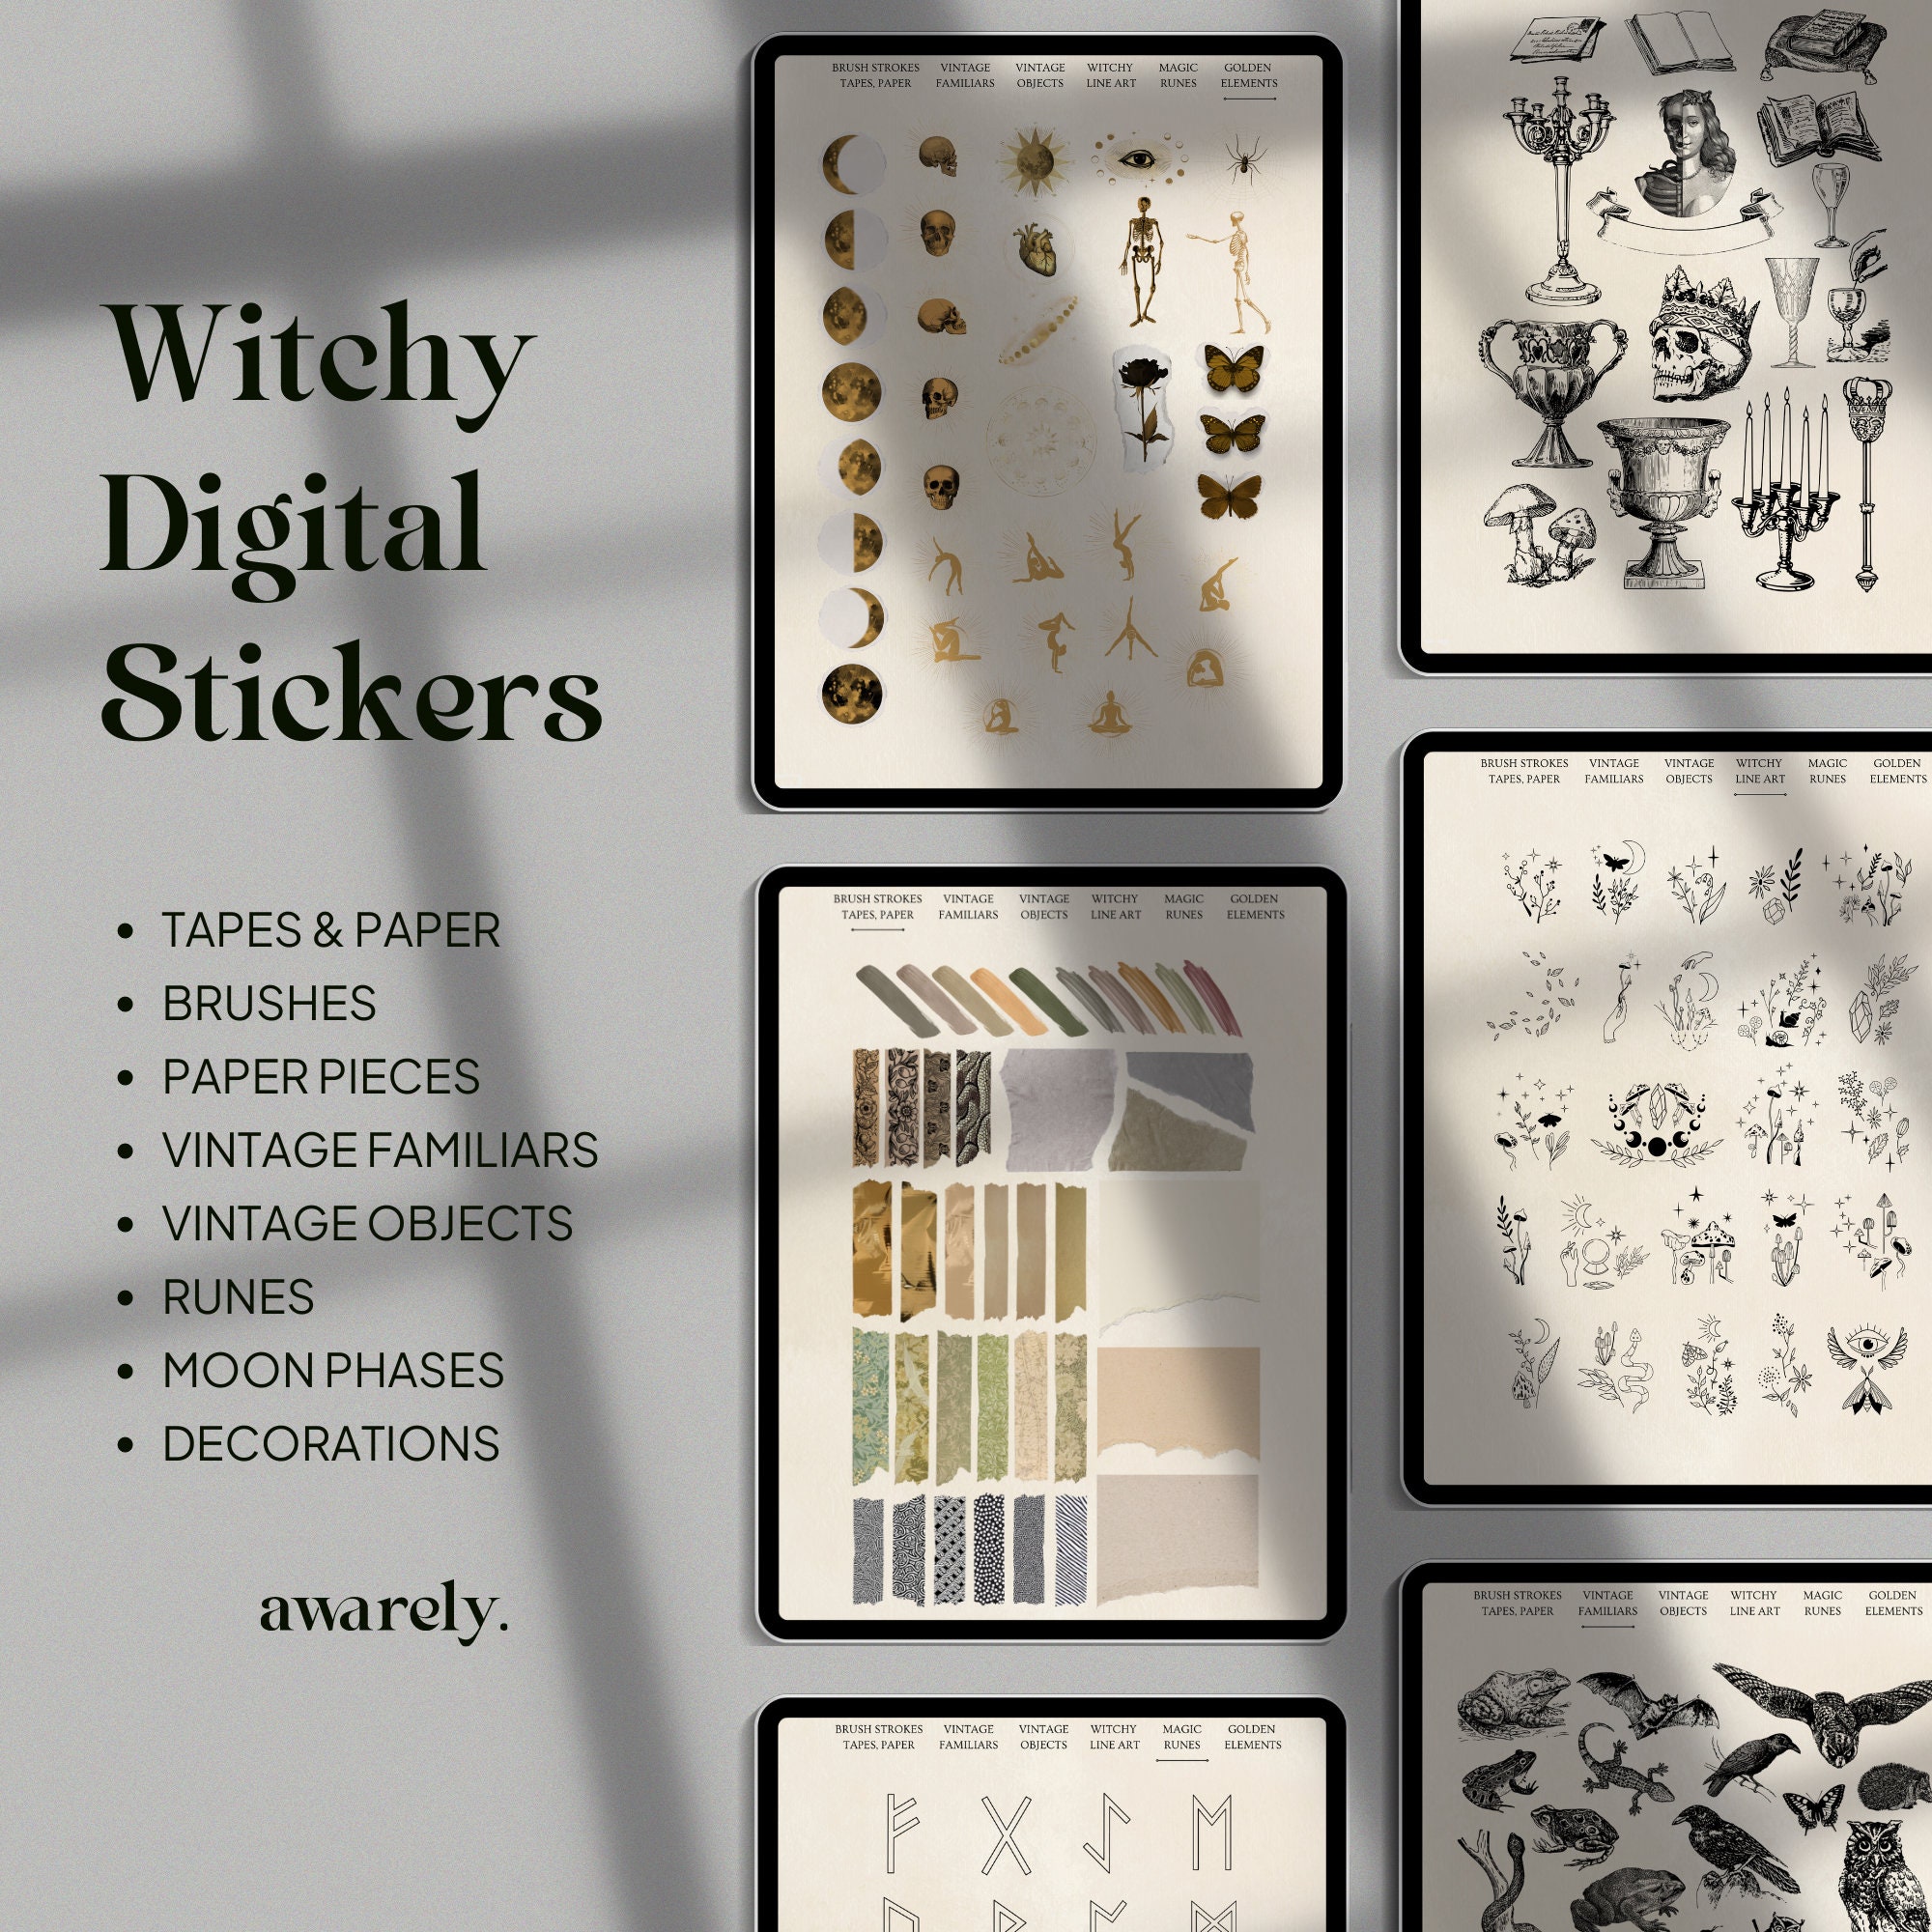 Hand of tarot cards vinyl Sticker, witchy stickers, adult stickers, wa –  Jenny V Stickers